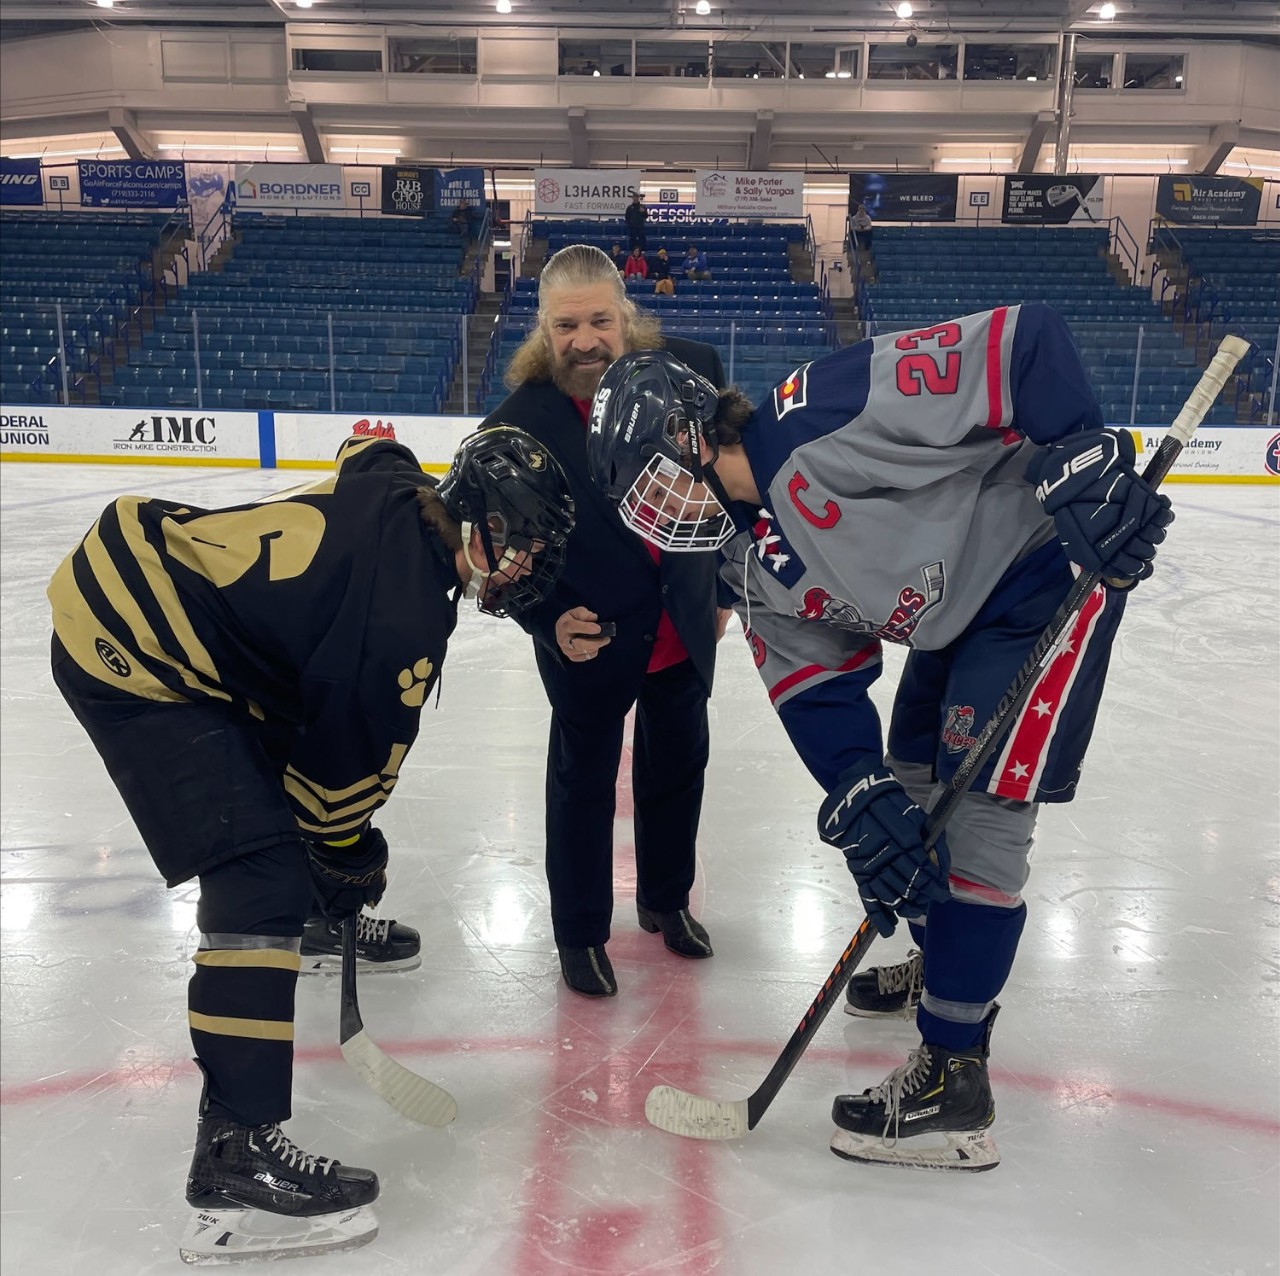 Hockey players from both Liberty and Battle Mountain high schools face off while former Coach Walt Aufderheide drops the puck.